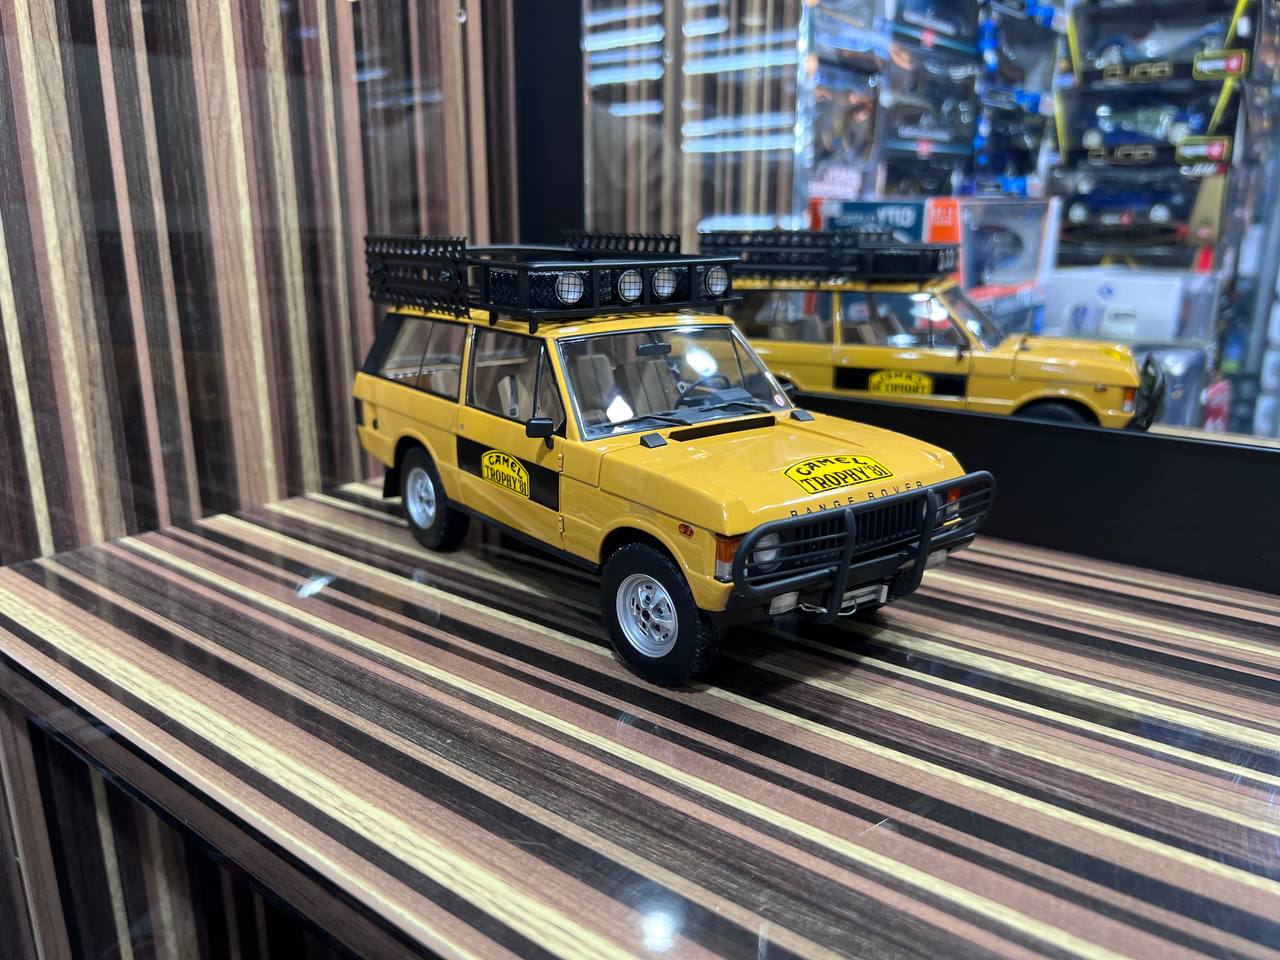 1/18 Diecast Land Rover Range Rover "Camel Trophy Sumatra 1981" Almost Real Scale Model Car